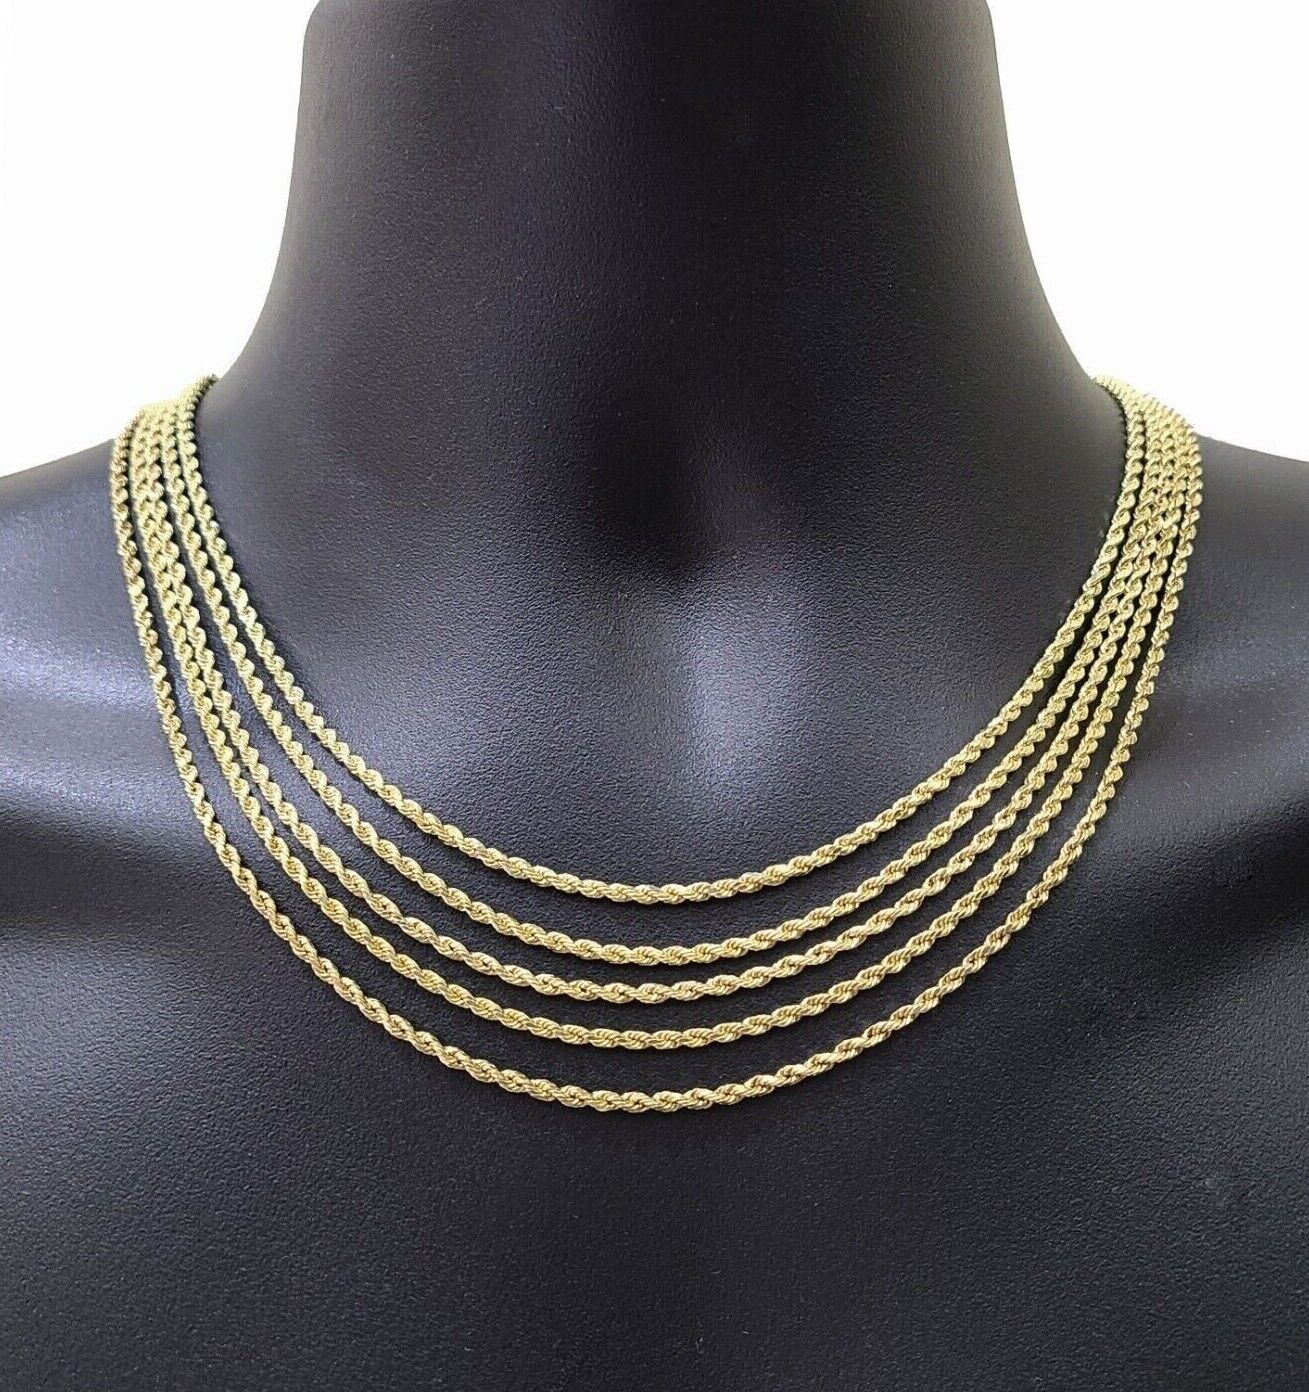 Real 14K Yellow Gold Rope Chain Necklace 2.5mm 3mm 4mm 5mm 18-26 inch Men Women 5 mm / 18 inch